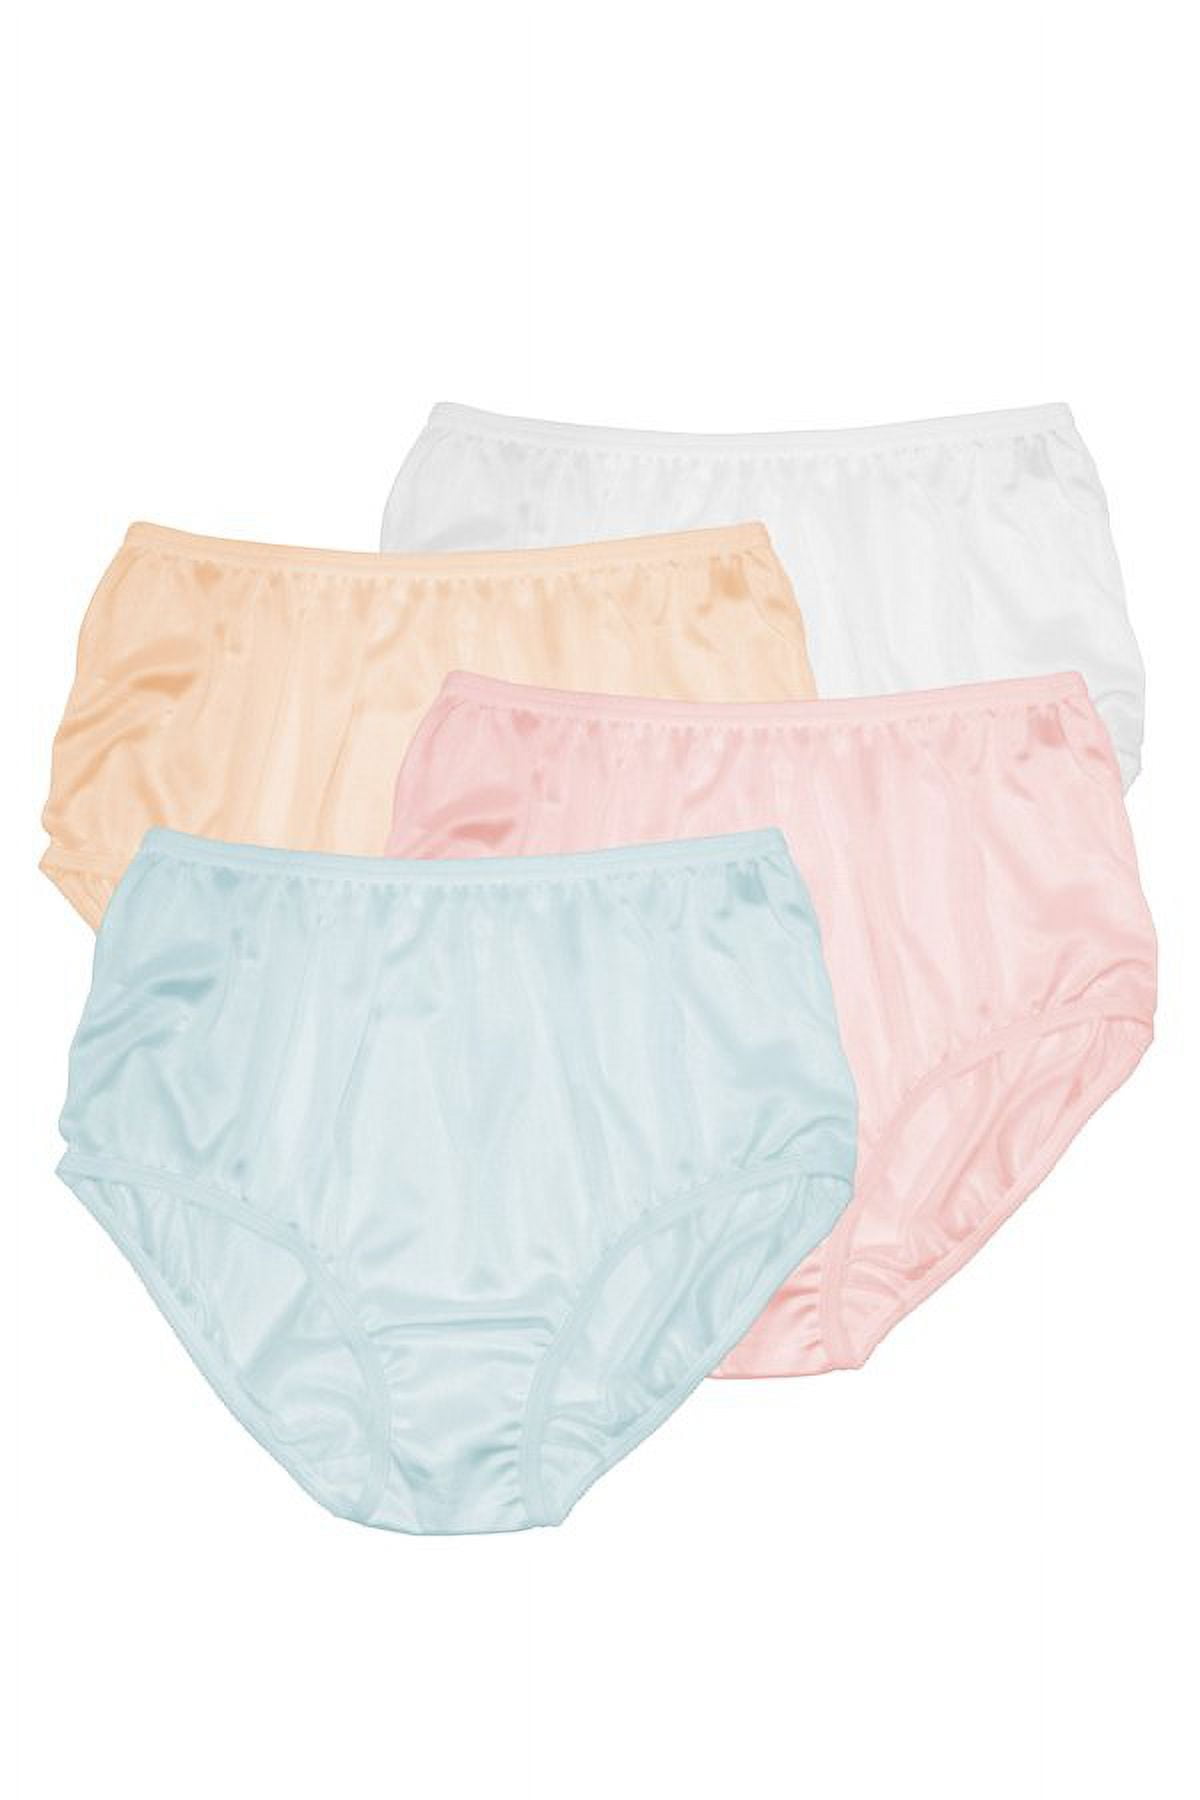 Women's Classic, Nylon, Full Coverage Brief Panty by Teri Lingerie Assorted  Colors 4 Pack 